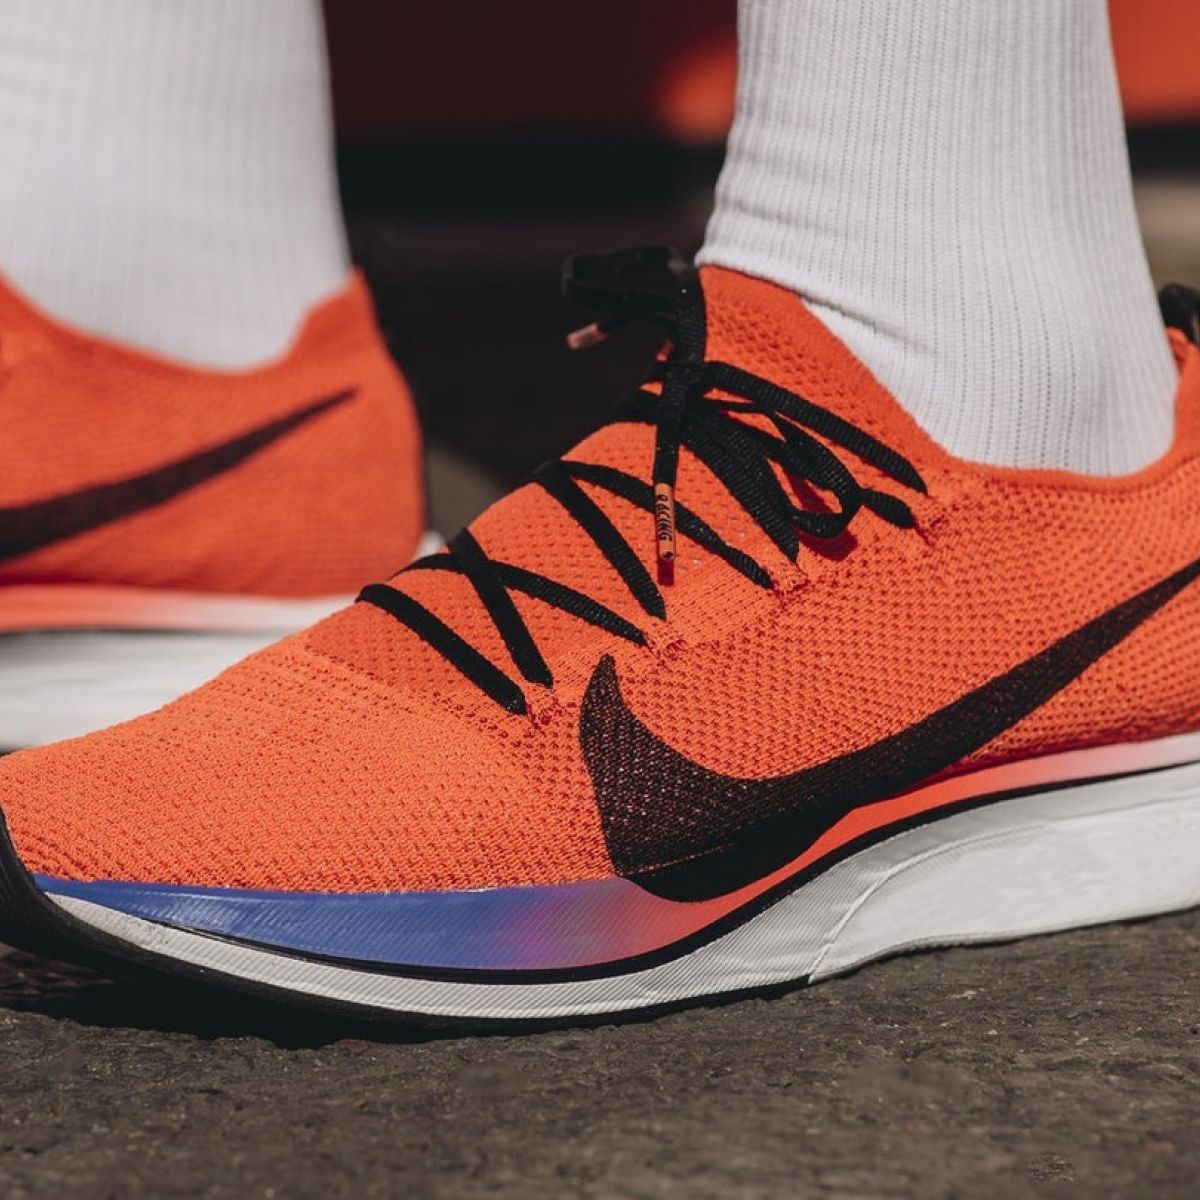 cost of nike vaporfly shoes